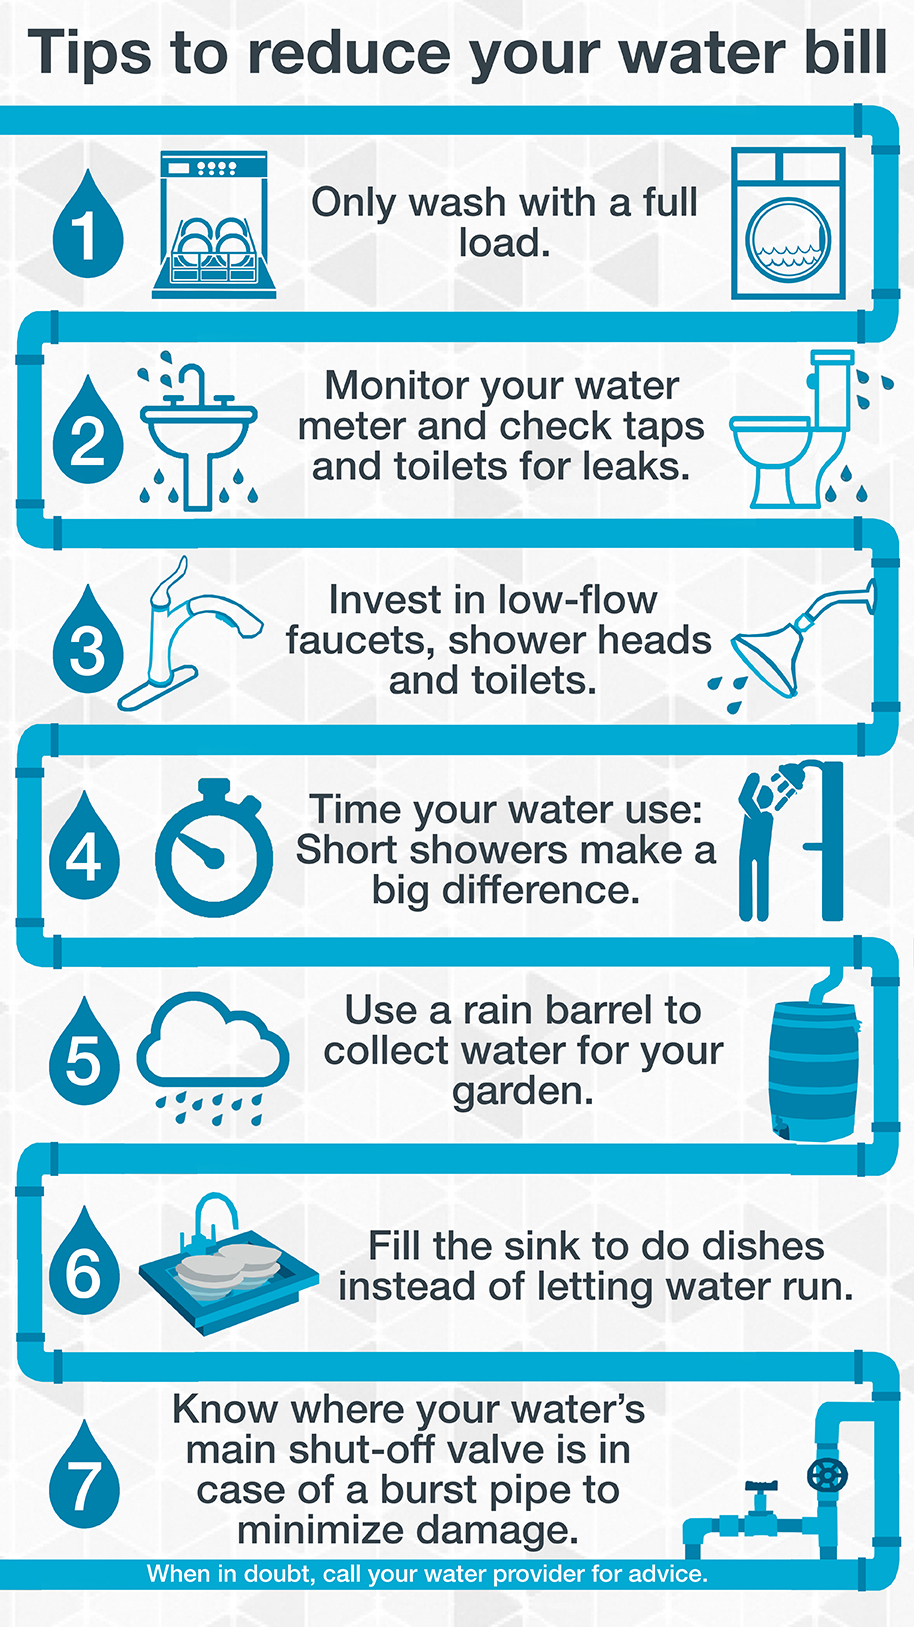 Tips to control your water bill